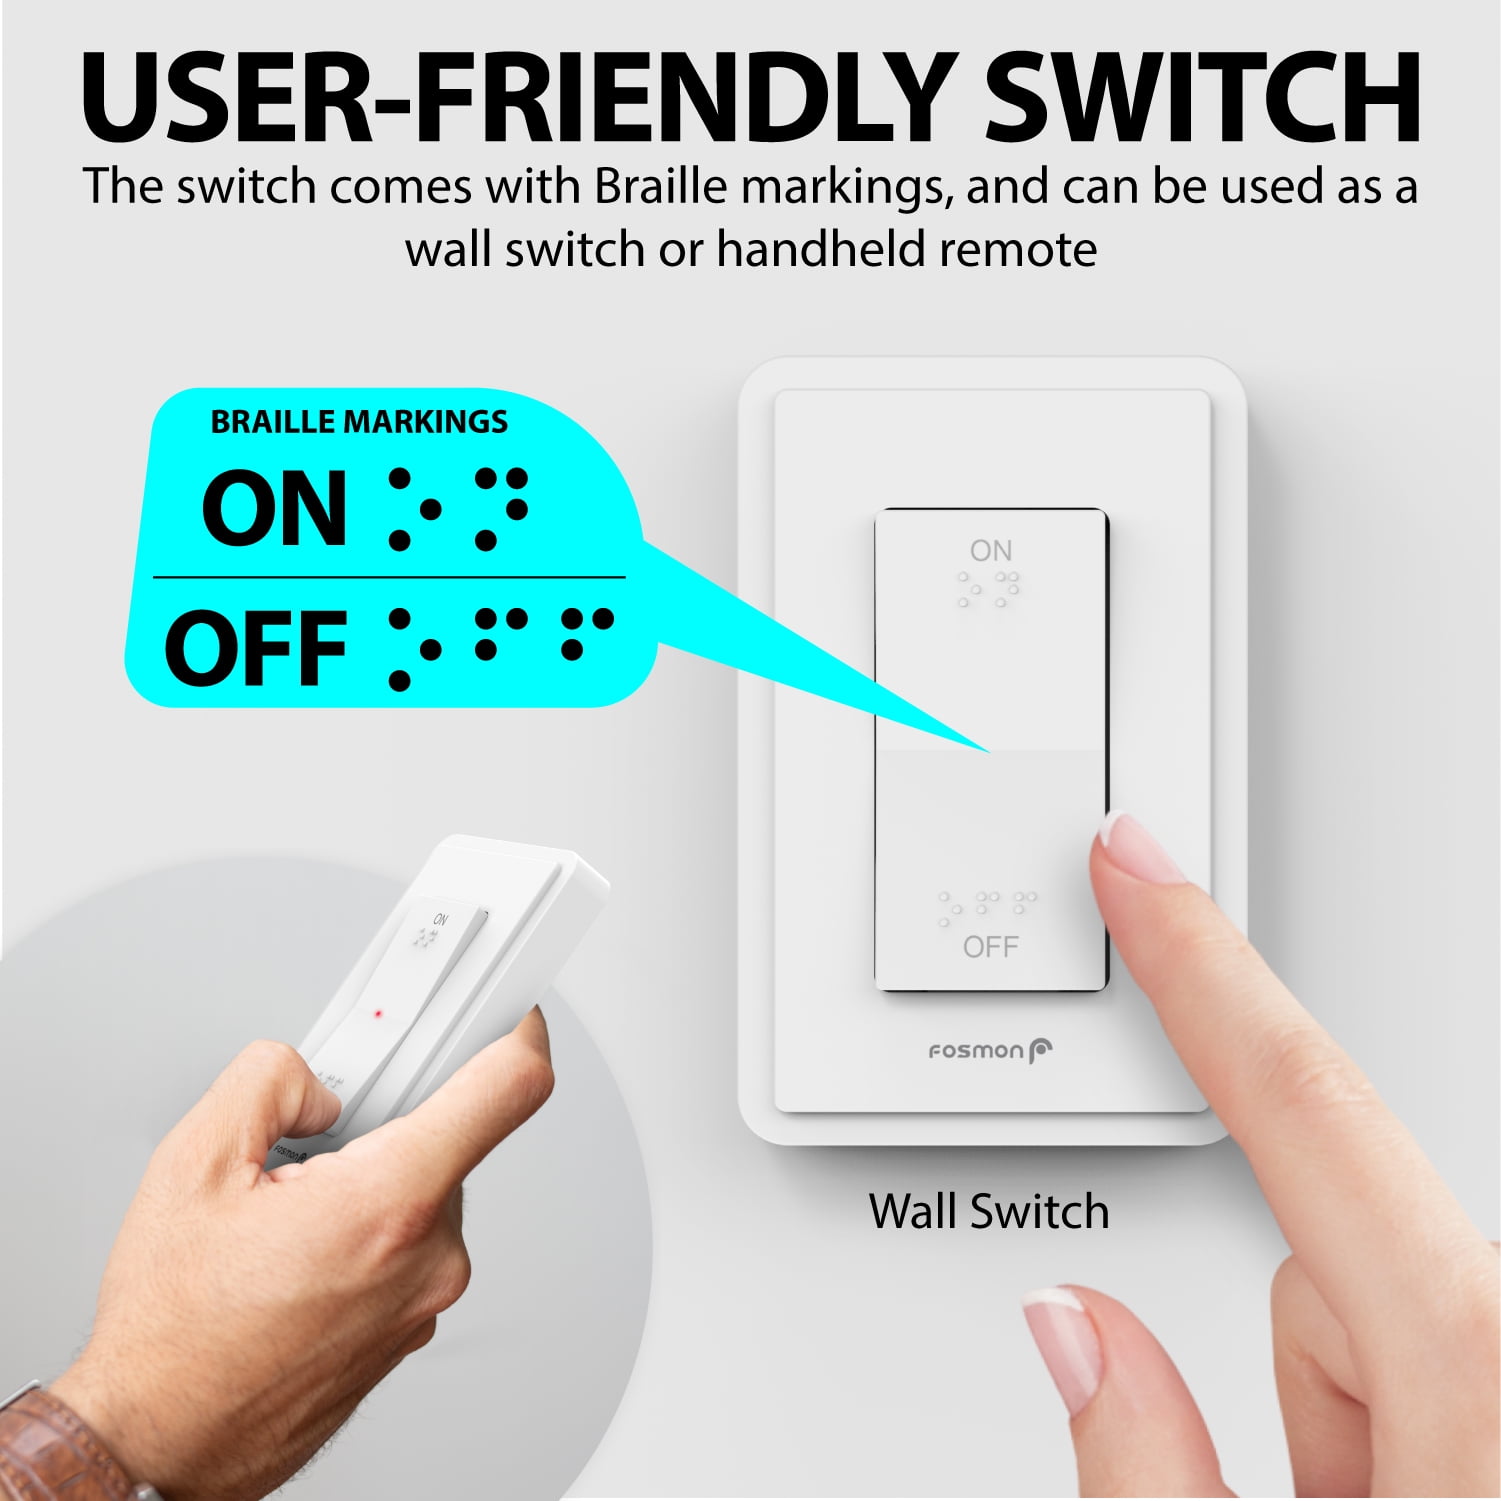 Fosmon Outdoor Indoor Wireless Remote Control 3-Prong Outlet - UL Listed (3 Receiver, 1 Remote), (13a 125V 1625W) Heavy Duty Waterproof Grounded